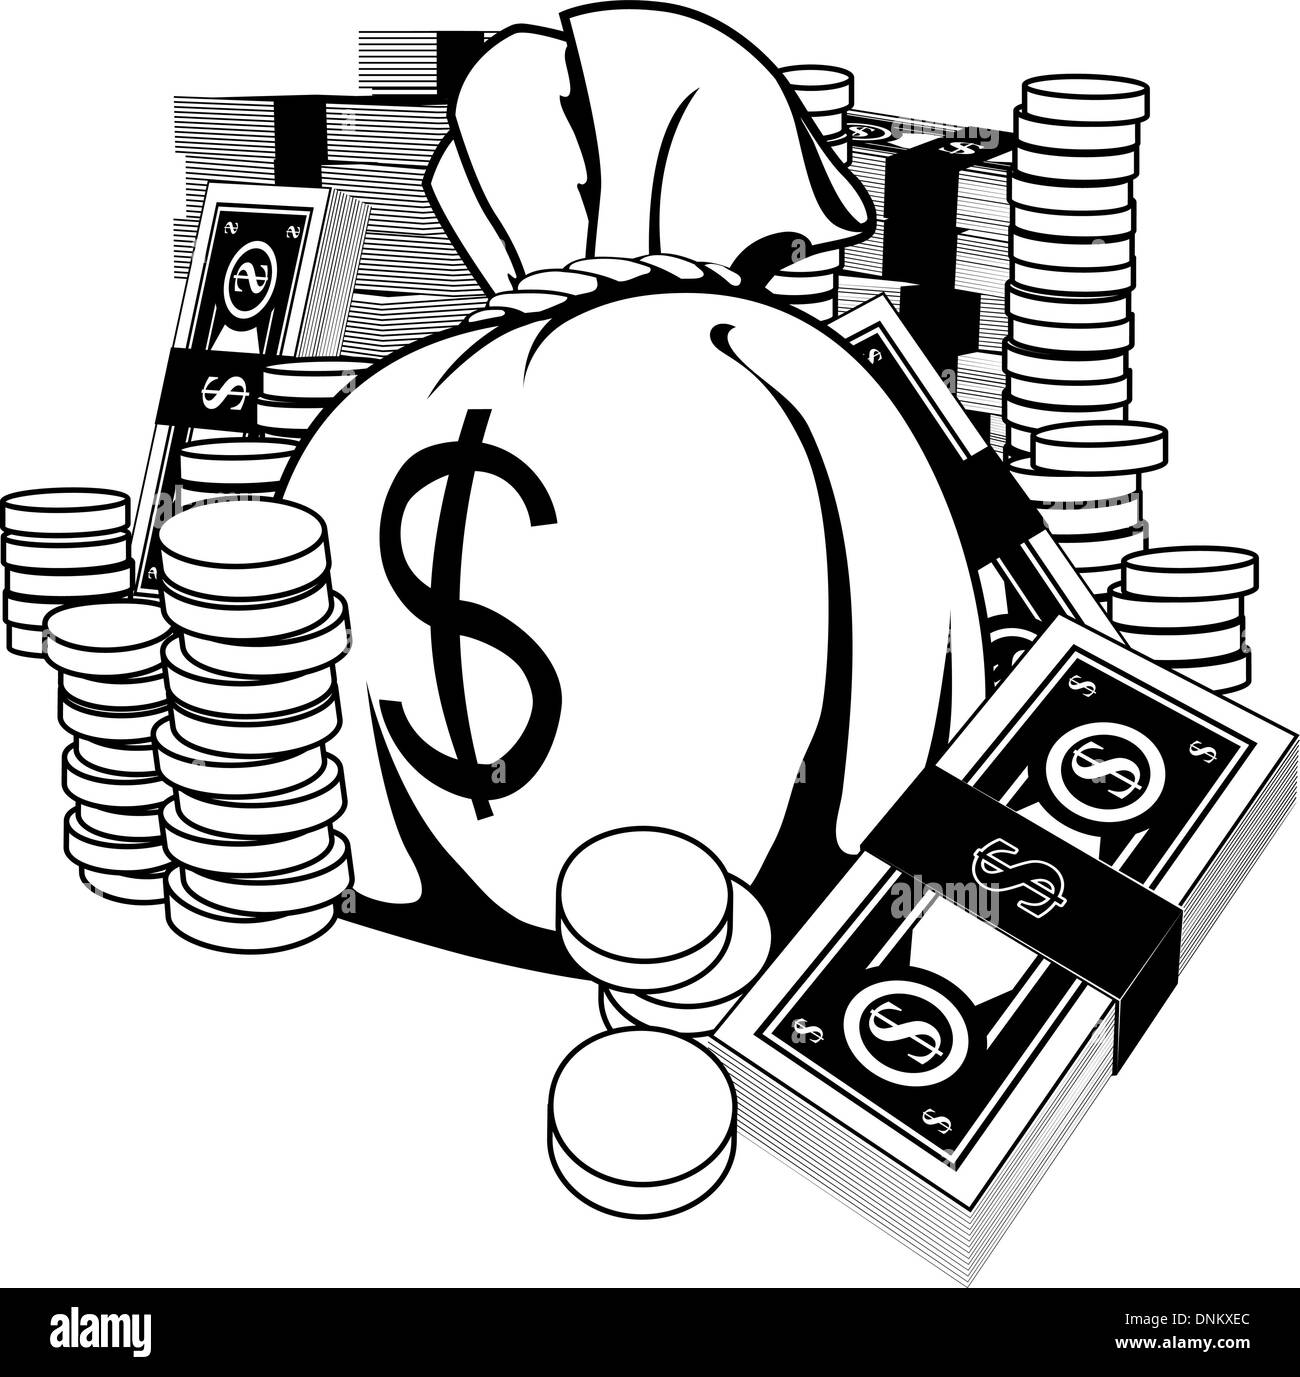 Monochrome illustration of money in the form of cash and gold coins, with big money sack. Stock Vector